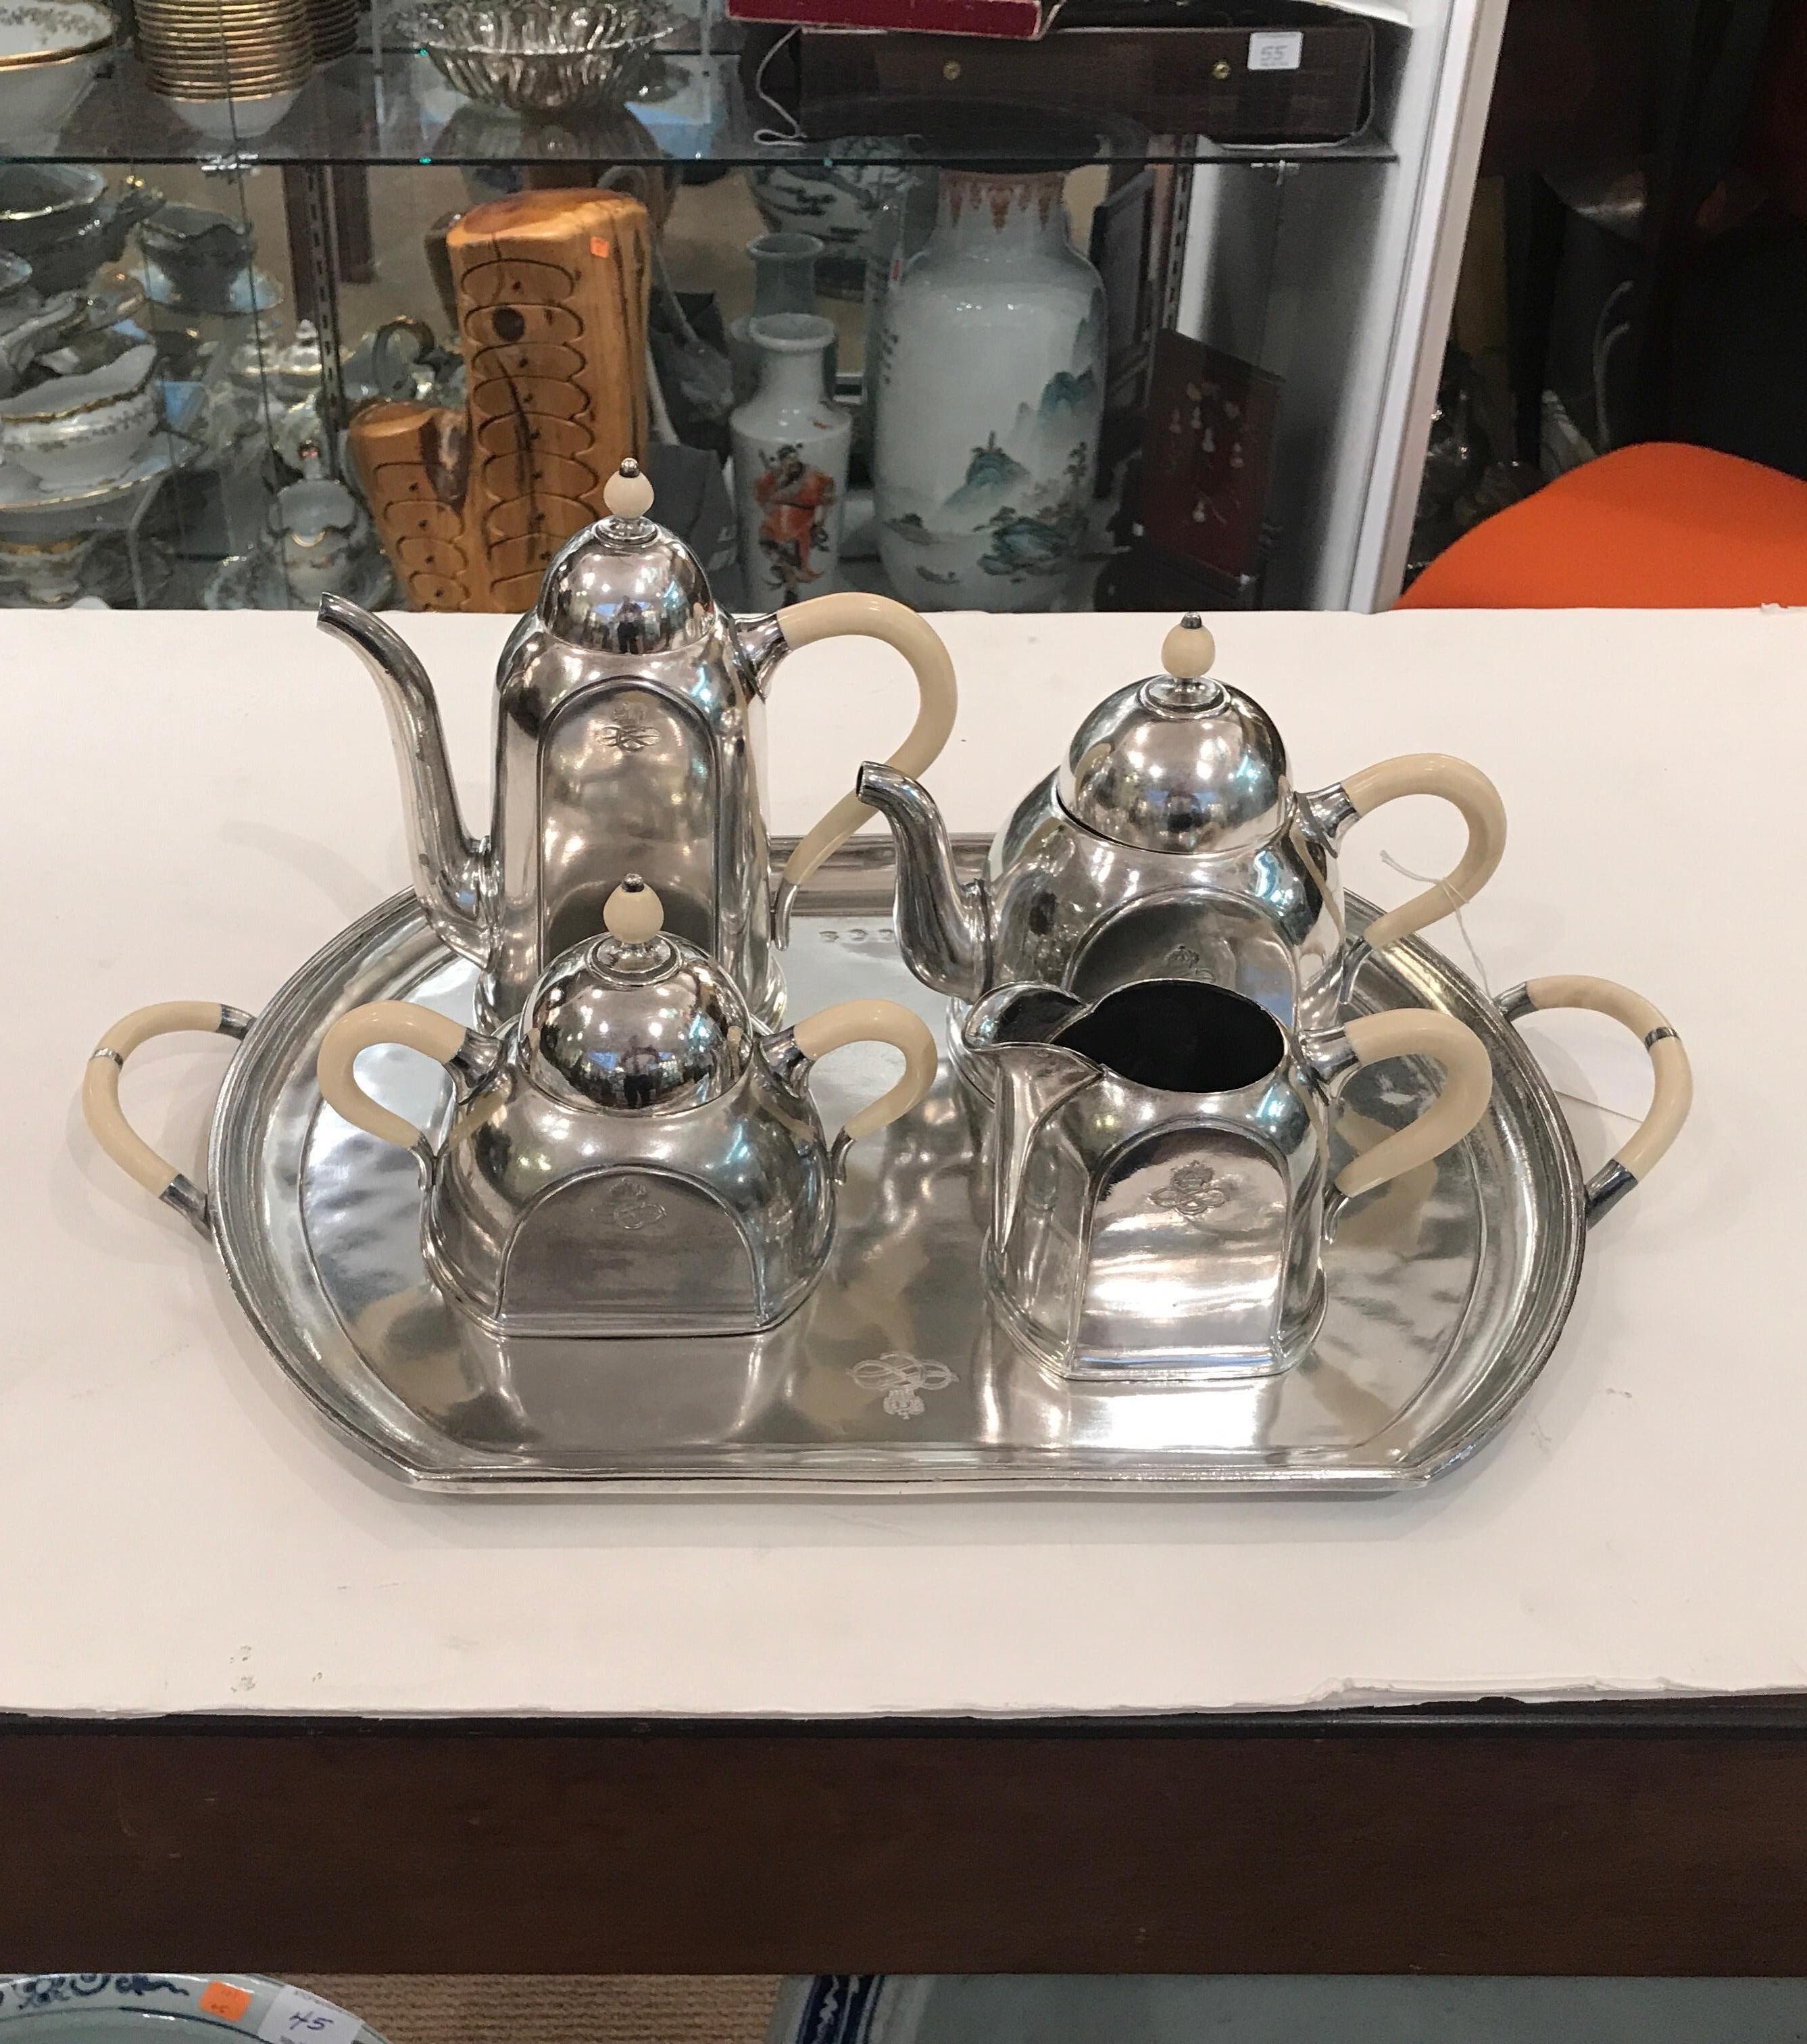 An elegant hotel silver plate Art Deco five piece tea and coffee set. The set consists of original tray, coffee pot, tea post, covered sugar, and creamer. The deco design which has broad flat bottoms to prevent spilling and tipping for use on an